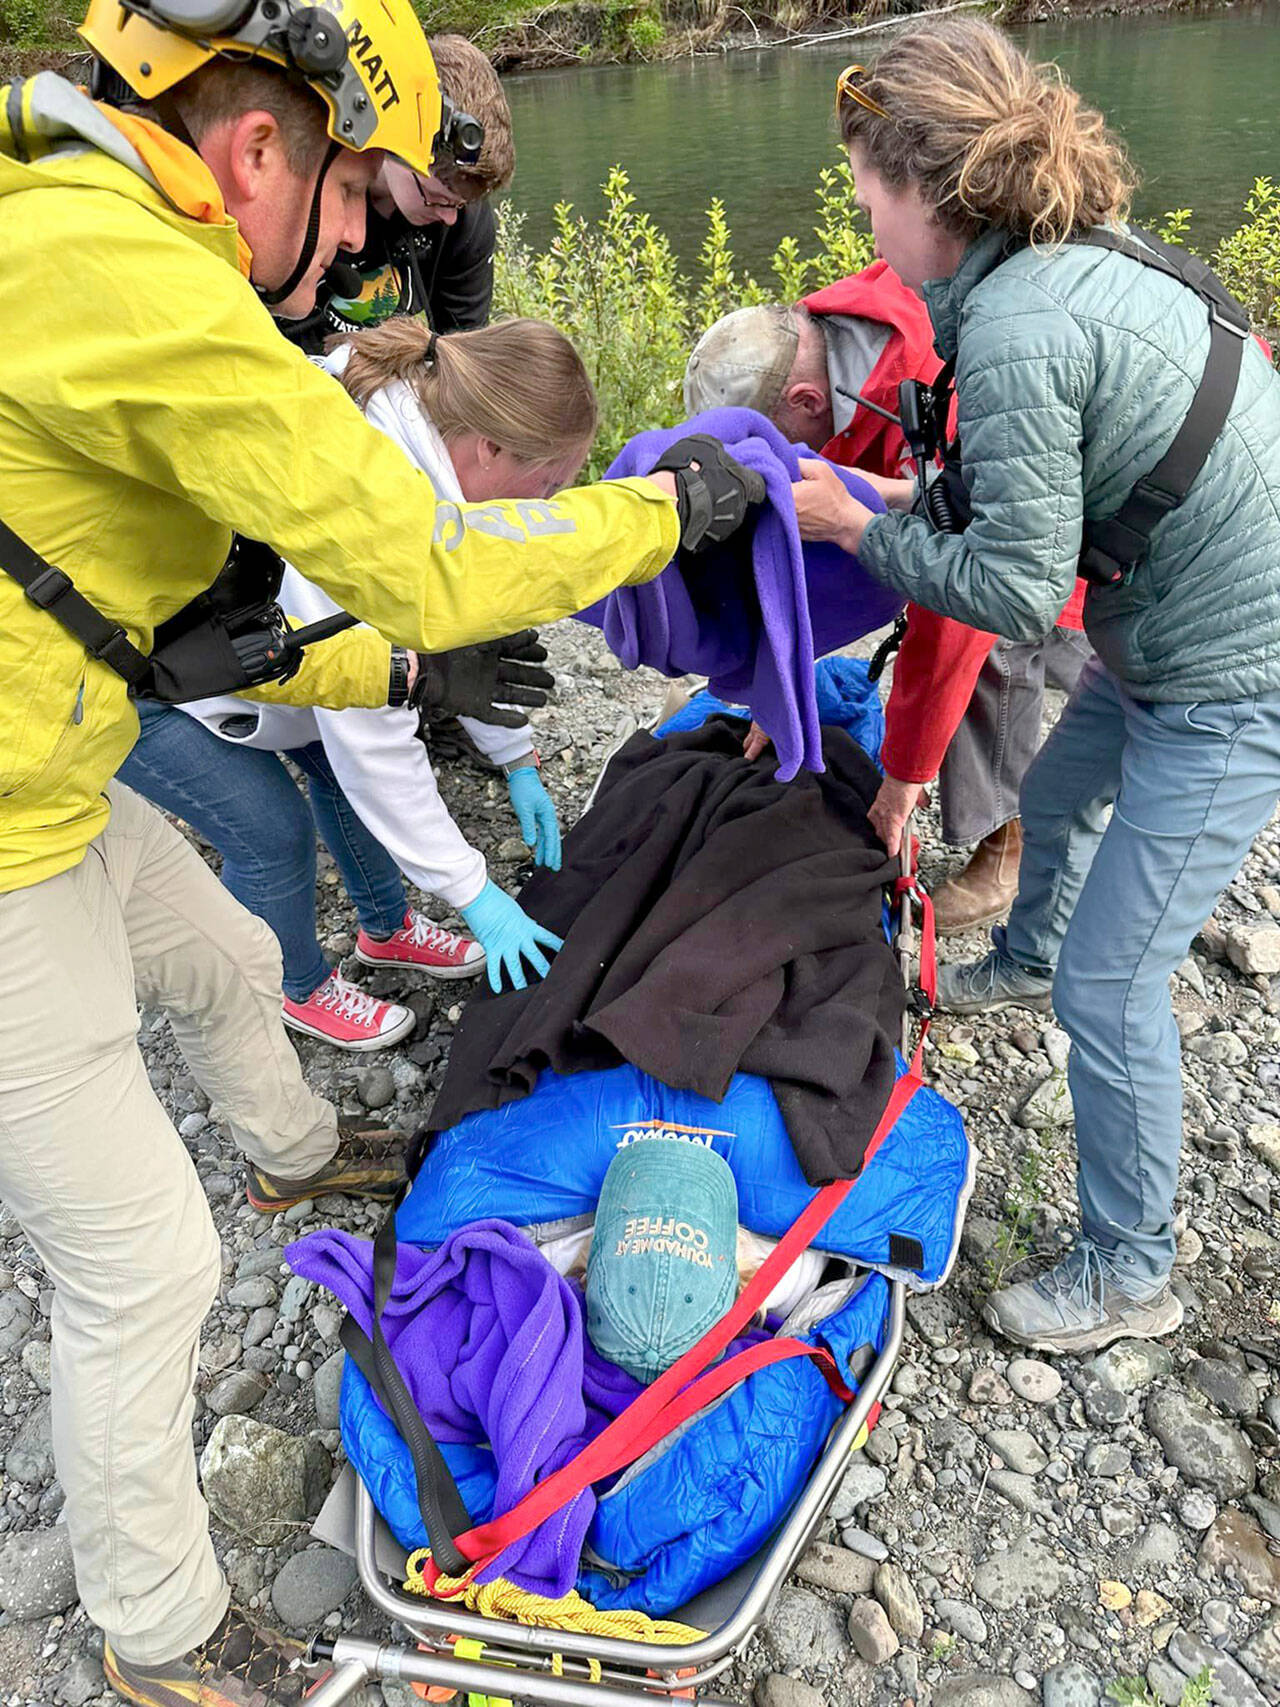 Rescuers in Jefferson County assist a woman on Wednesday who went looking for a hiker reported missing on Monday. The woman was injured attempting to cross the Duckabush River and transported to Jefferson Healthcare hospital in Port Townsend. (Brinnon Fire Department)